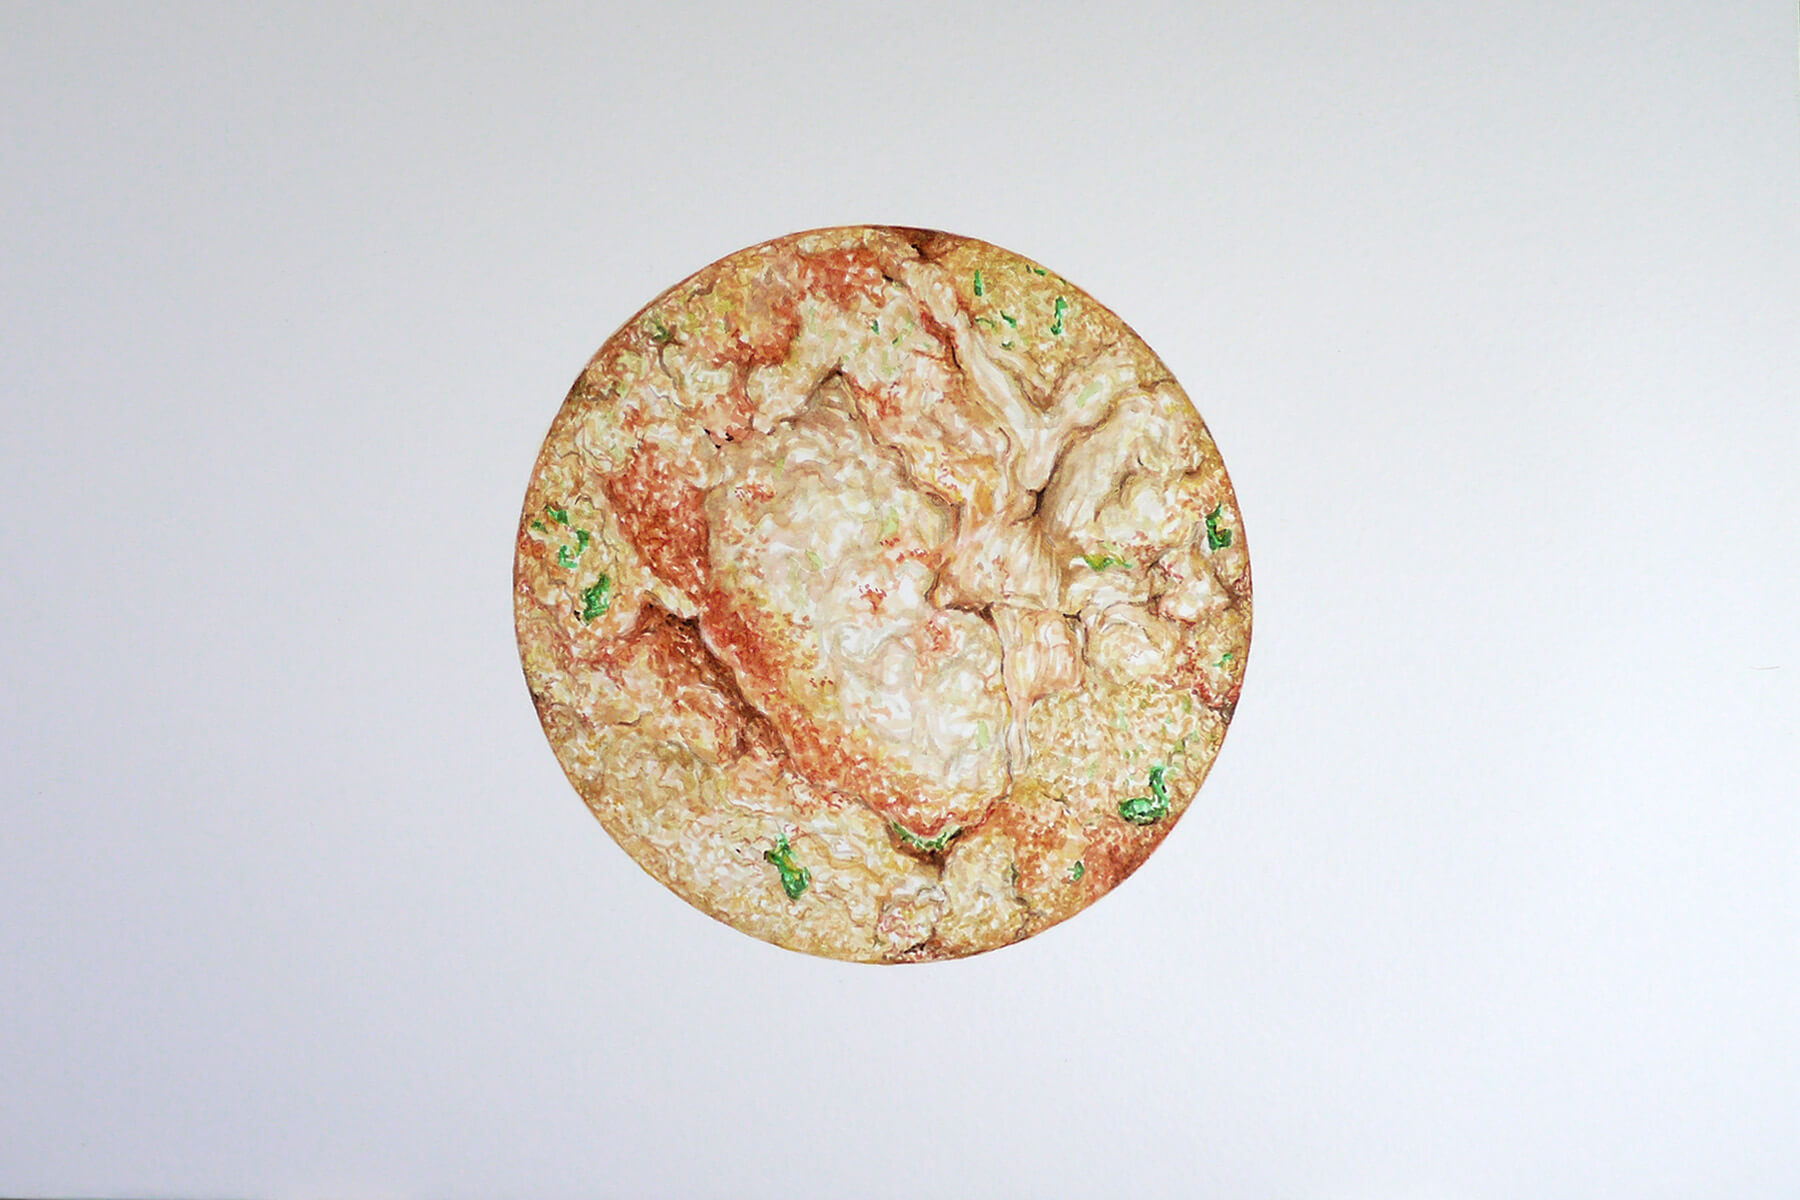 Japanize! (Gyoza/China) 2015, watercolor on montvale paper, 10 1/4 × 15 3/8 inches (26 × 39 cm)